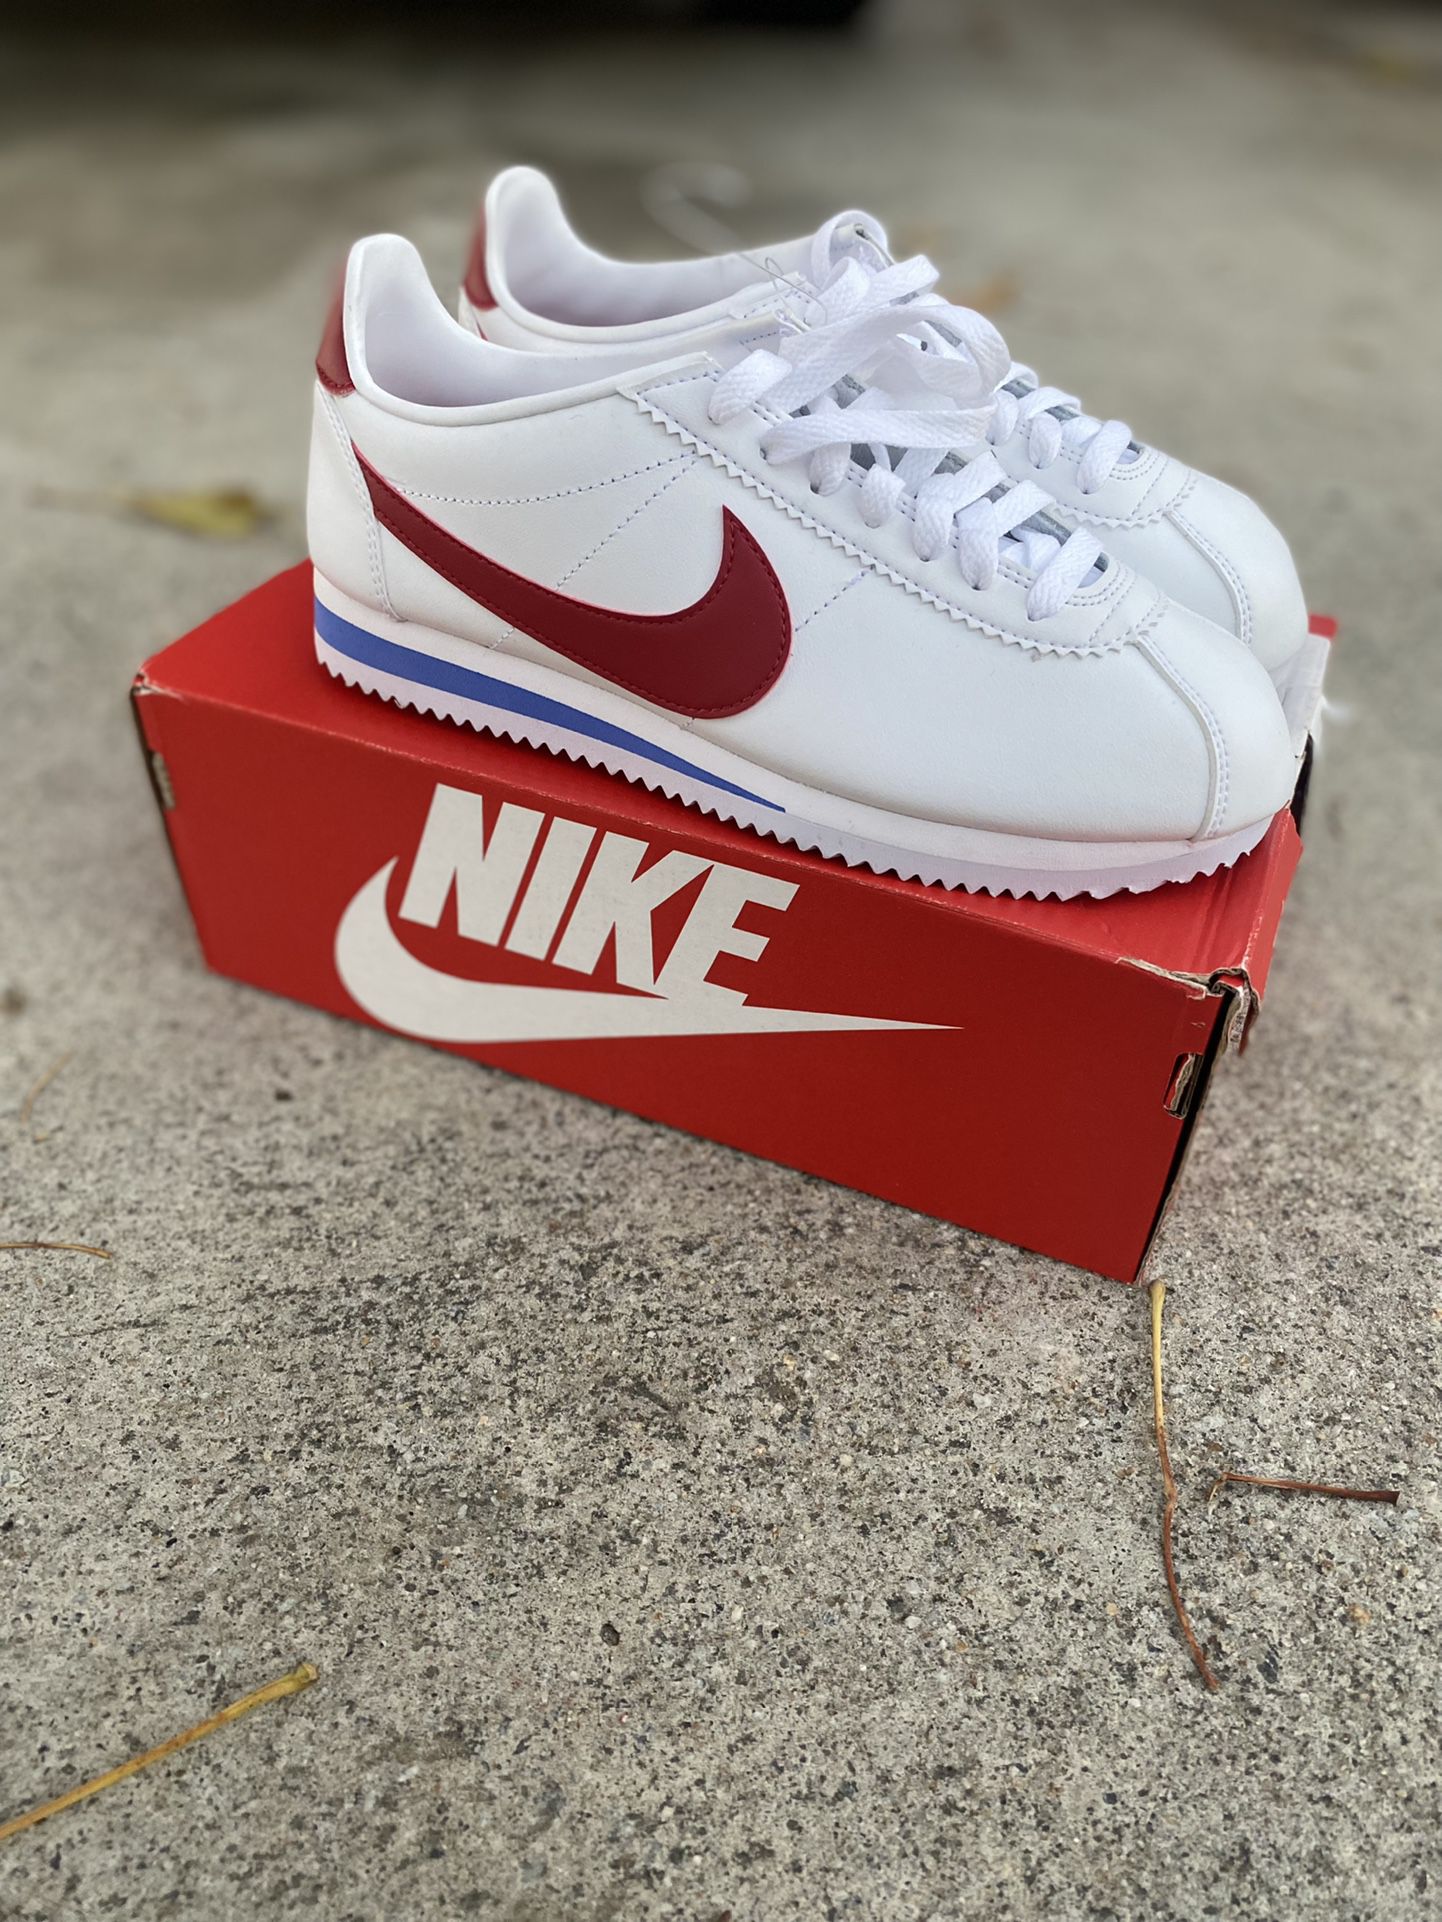 Womens Classic Nike Cortez Forrest Gump for Sale Valley, CA - OfferUp